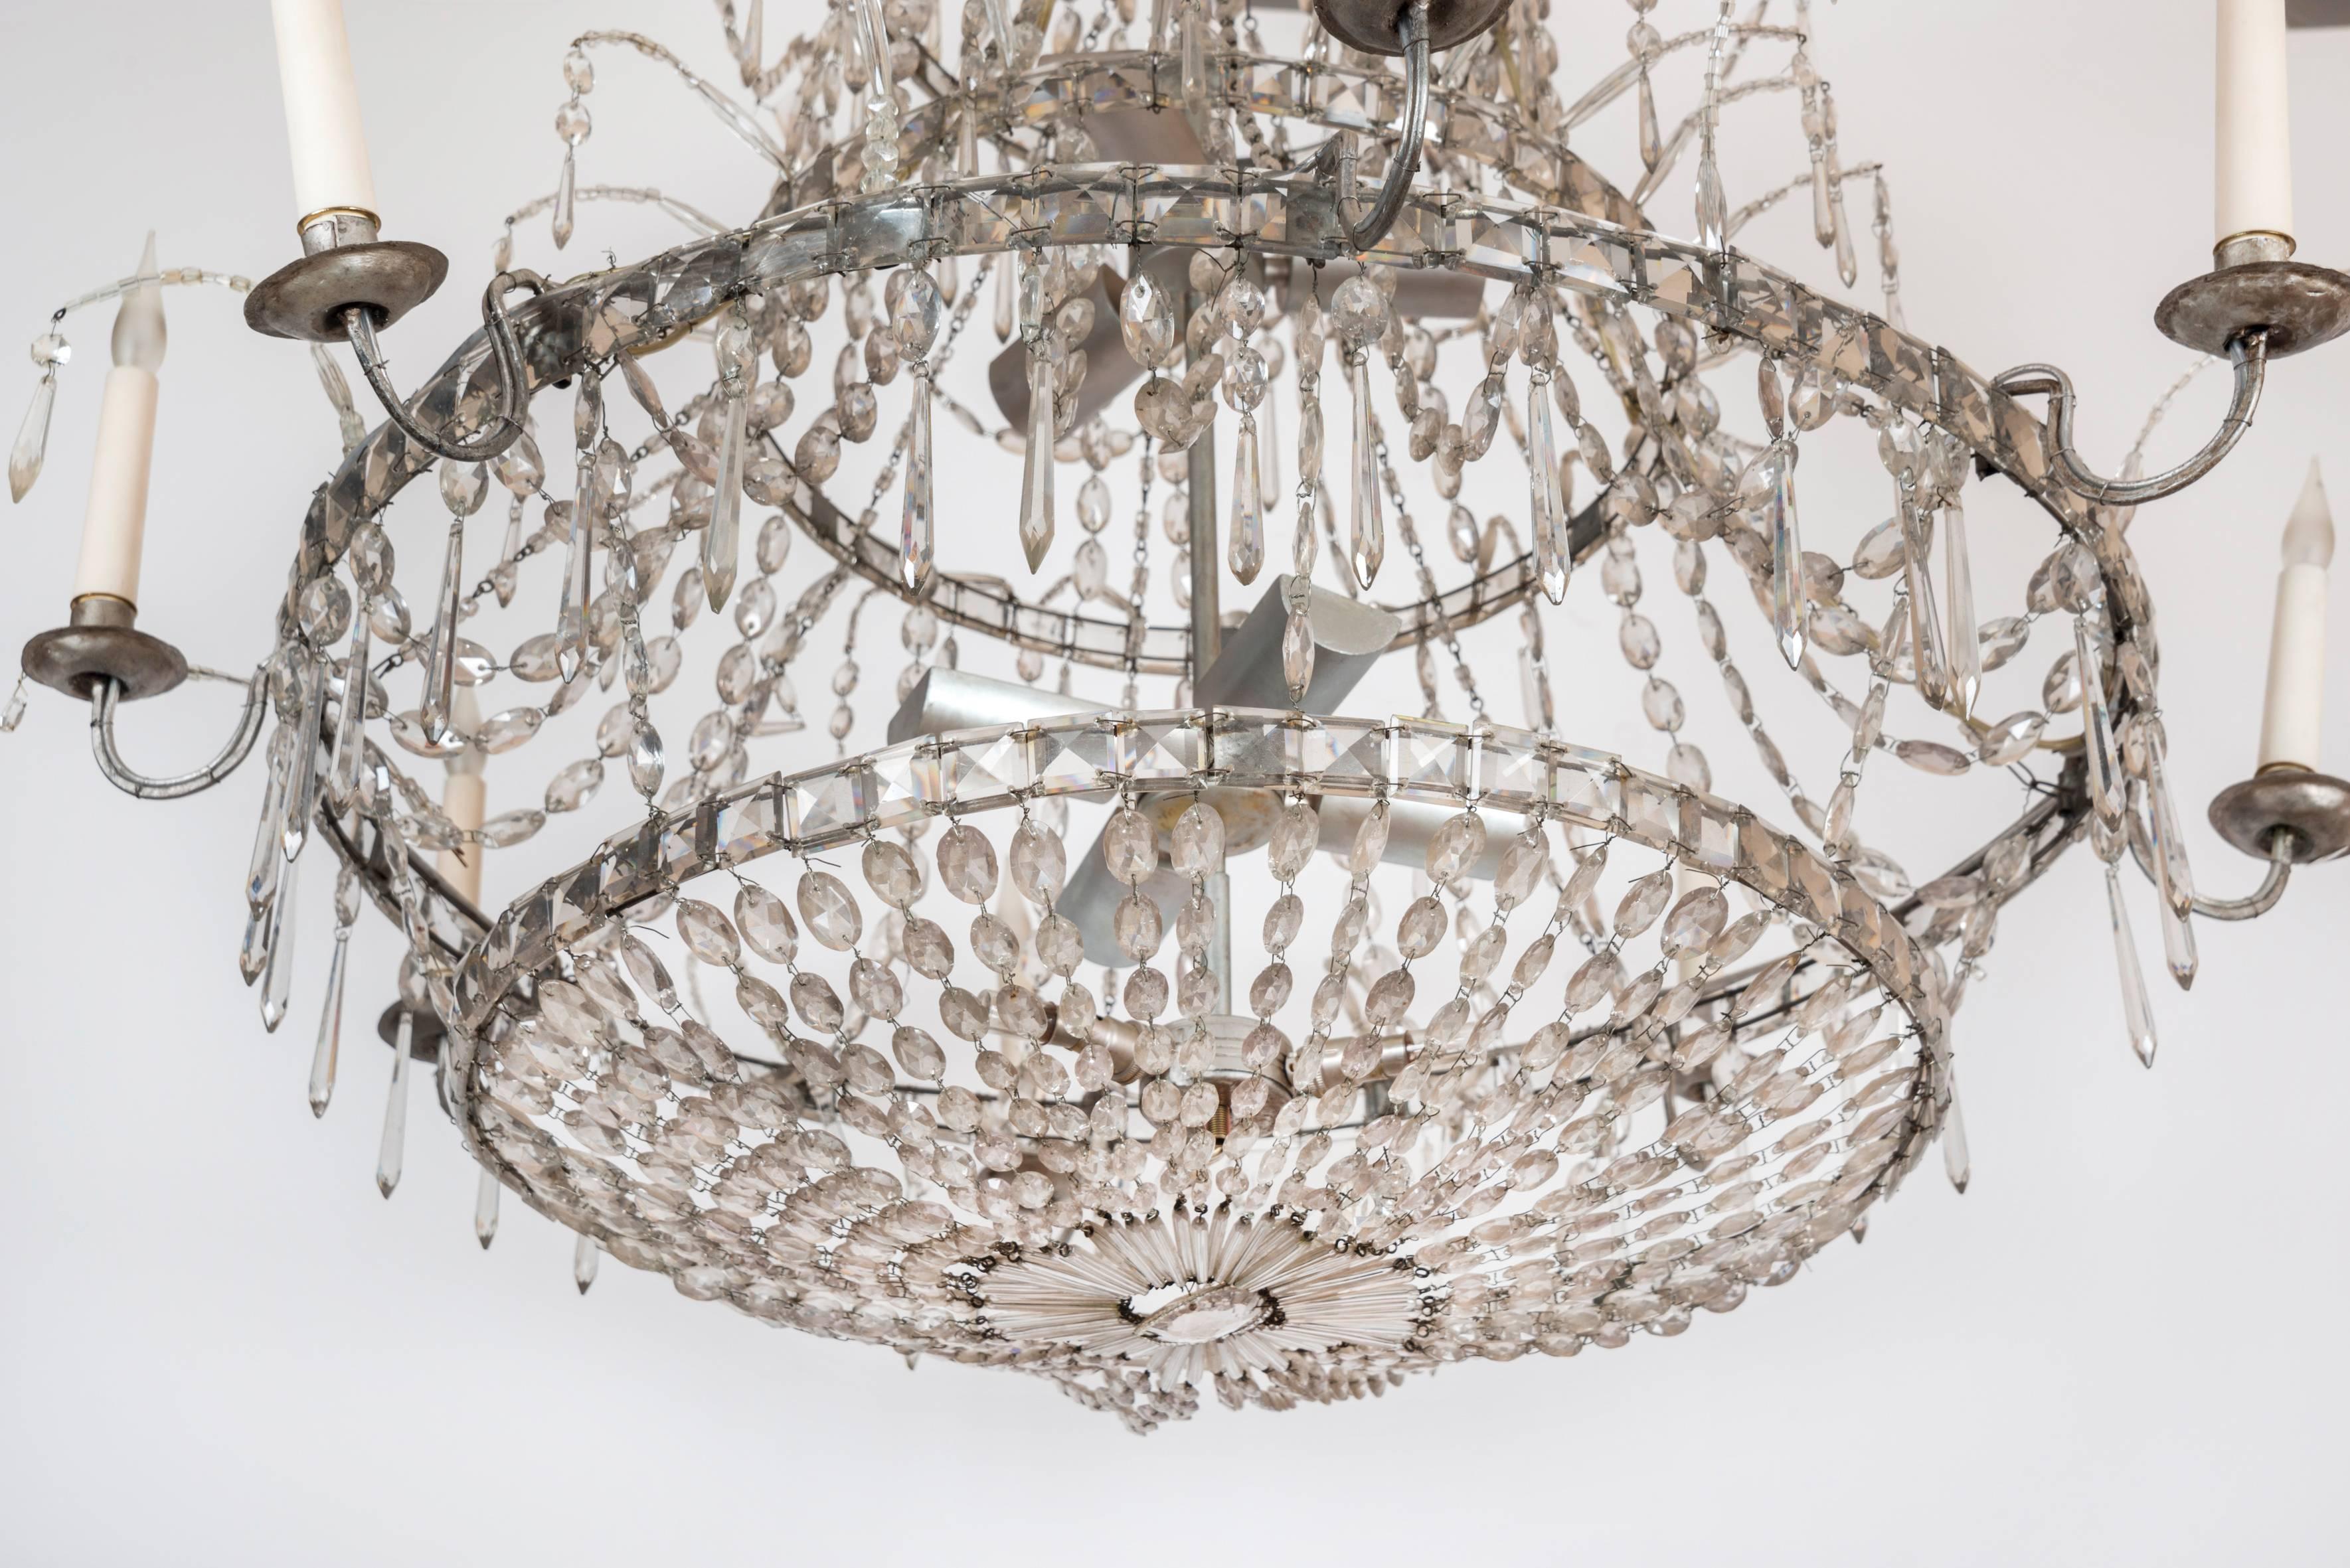 Crystal and iron chandelier, inside lighting, from Northern Europe.